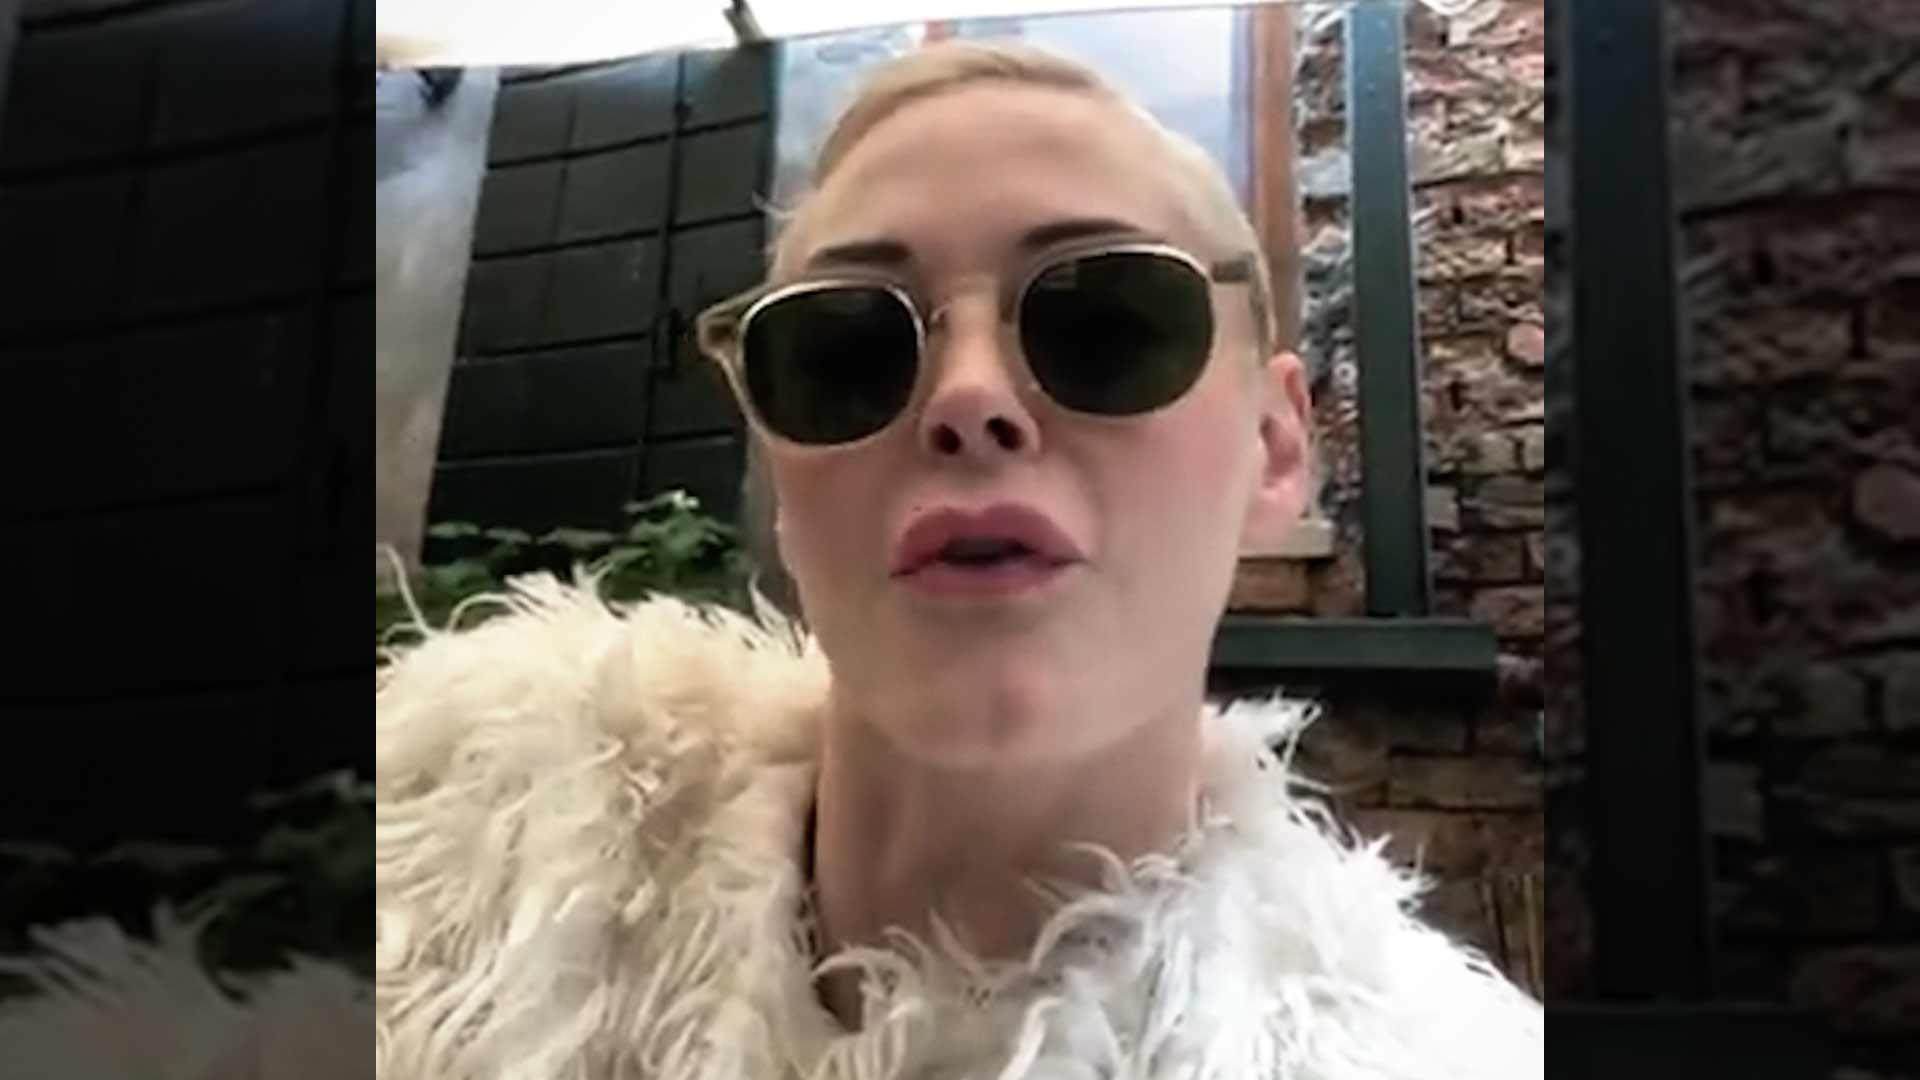 Rose McGowan Supports #FreeBritney Movement: ‘It’s Time She Gets to Be Free’